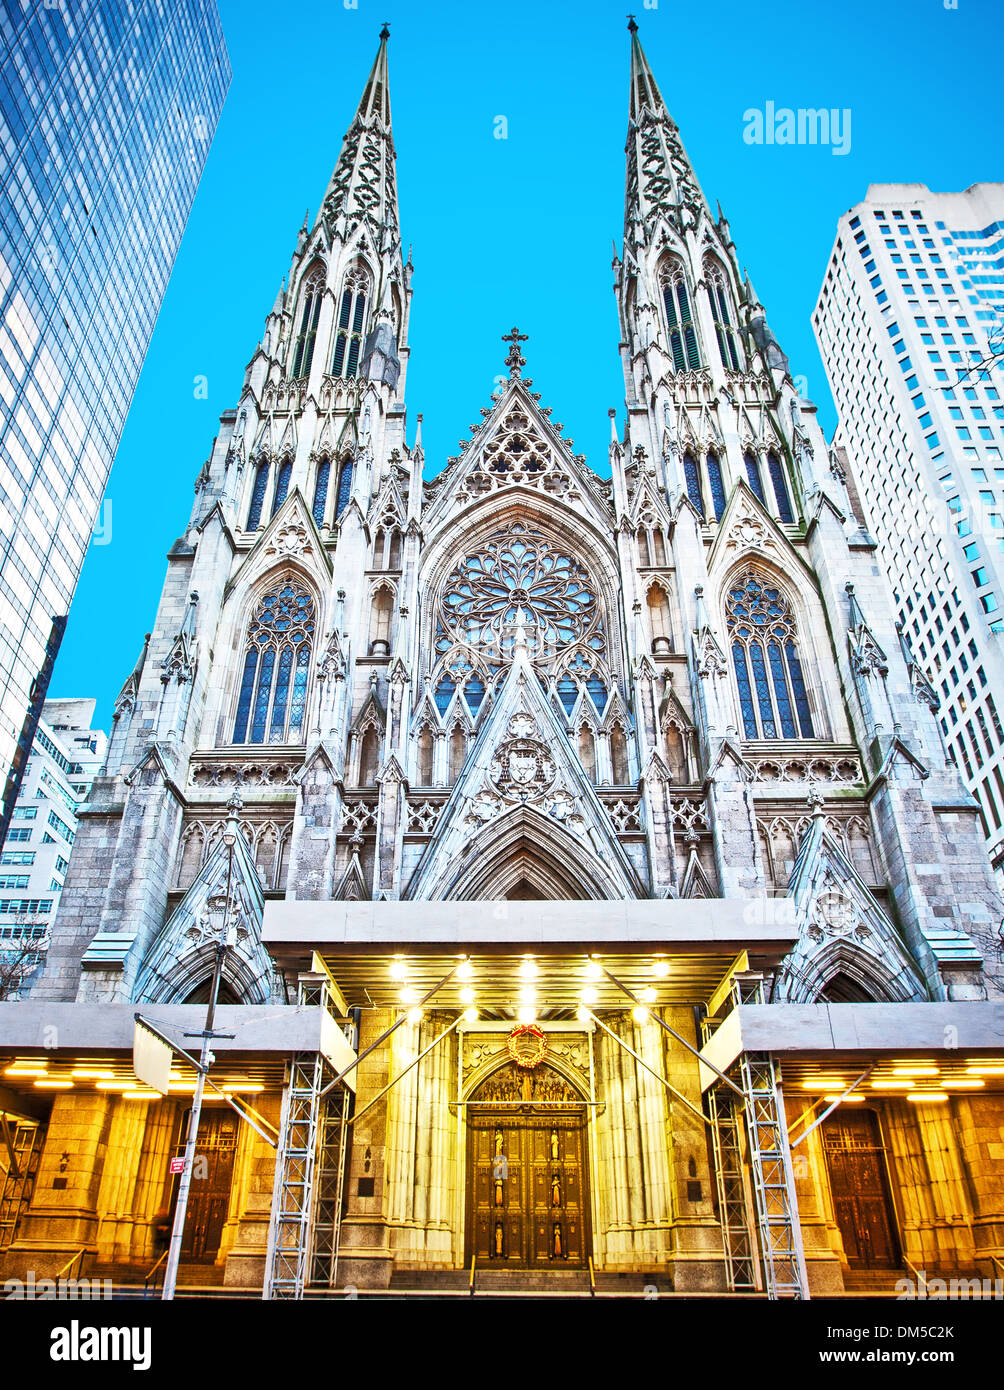 Exterior of St. Patrick's Cathedral in New York, New York. Stock Photo